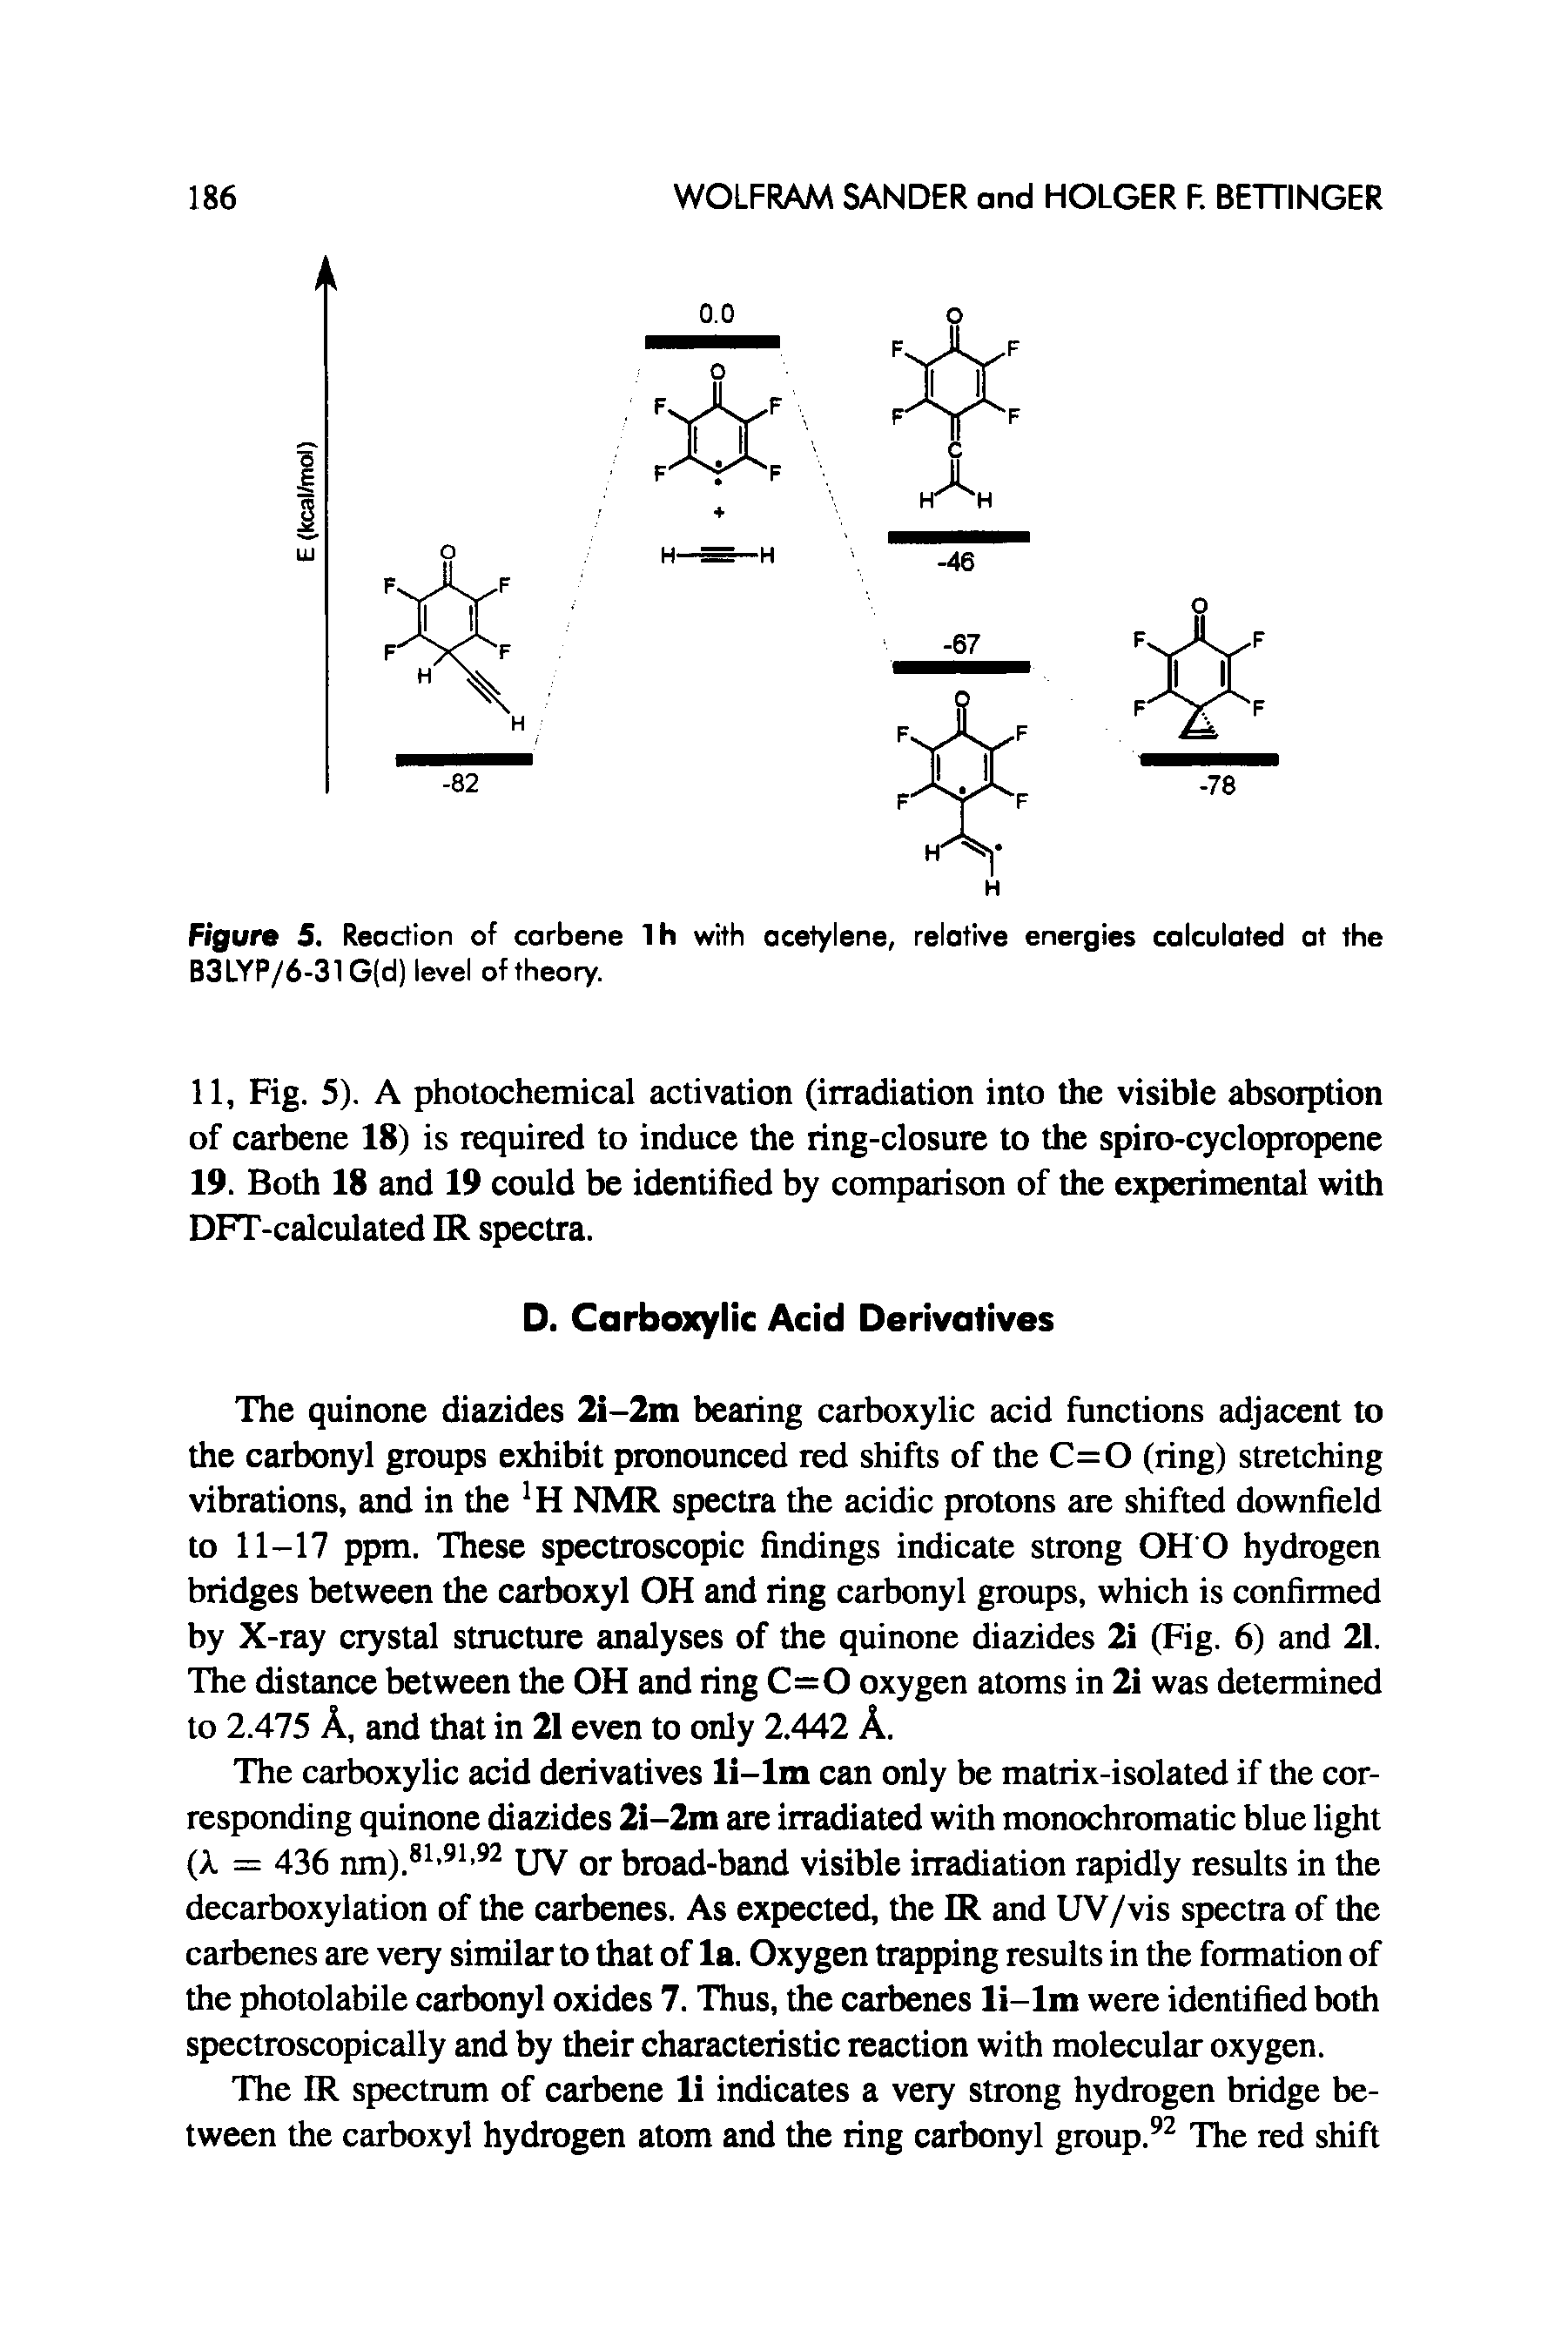 Figure 5. Reaction of carbene lh with acetylene, relative energies calculated at the B3LYP/6-31 G(d) level of theory.